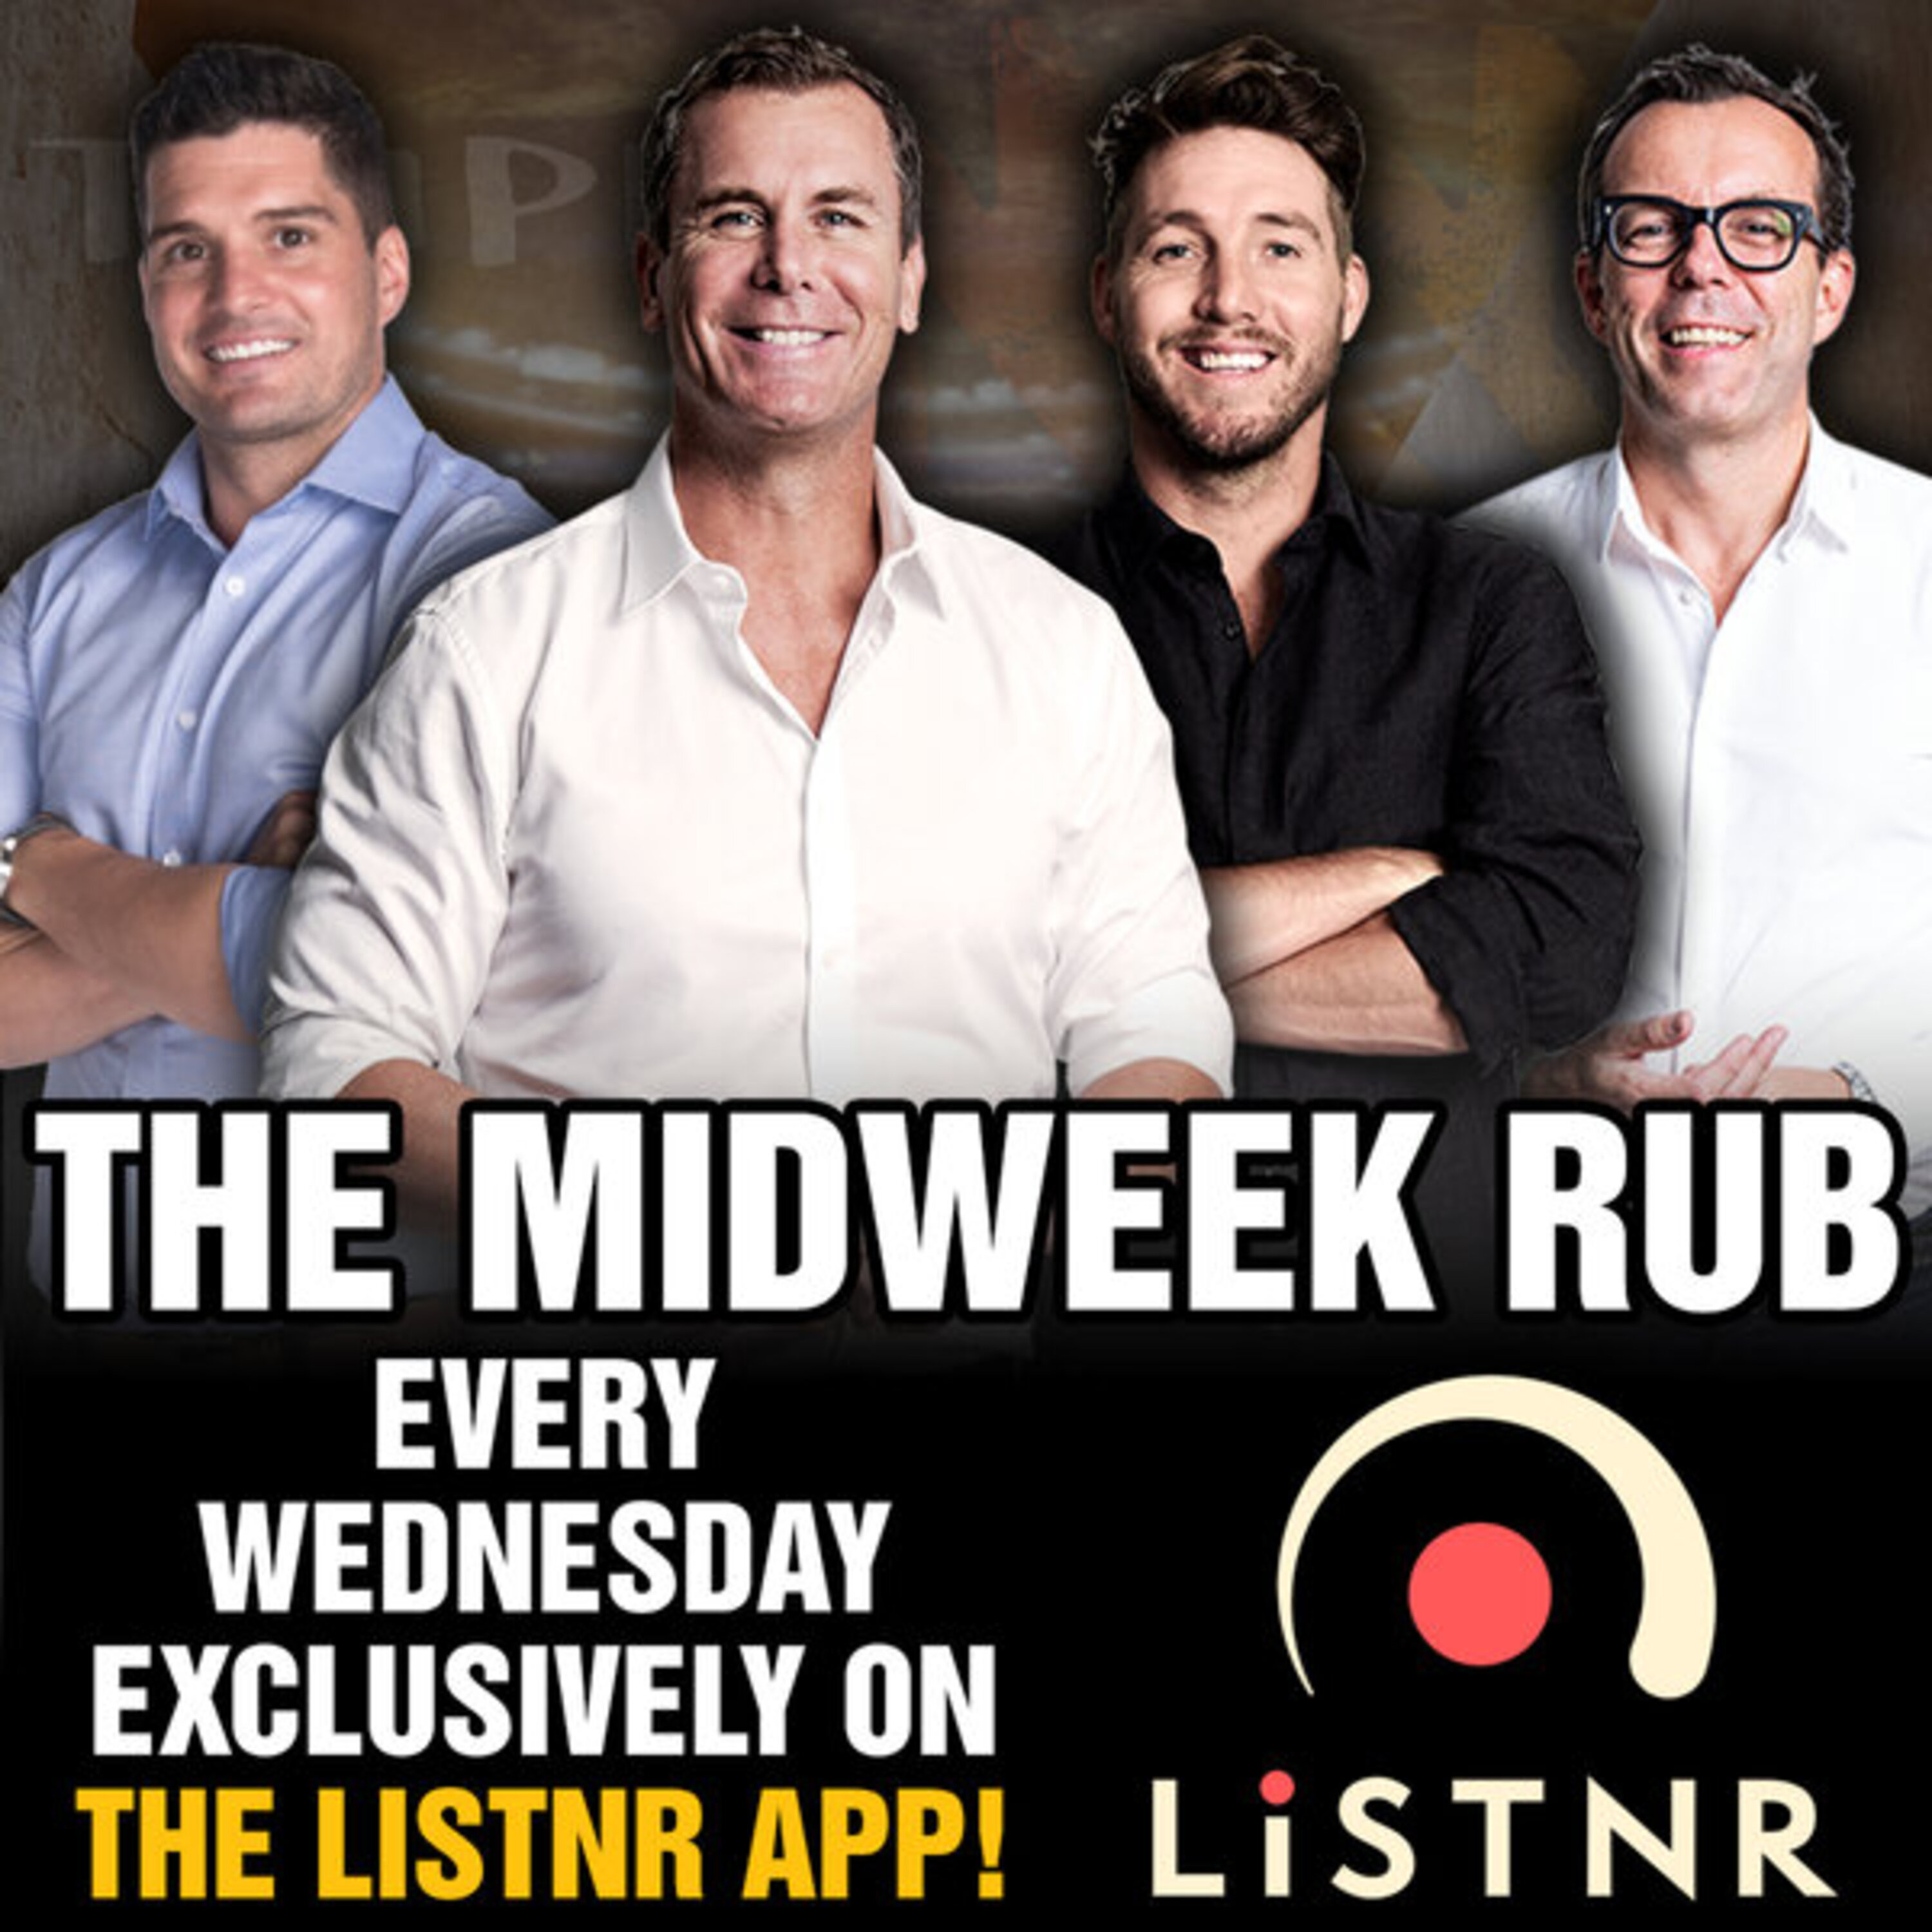 Midweek Rub | Are Melbourne back in the pack, who should Damo get in the ring with, Jeremy Cameron or Toby Greene?